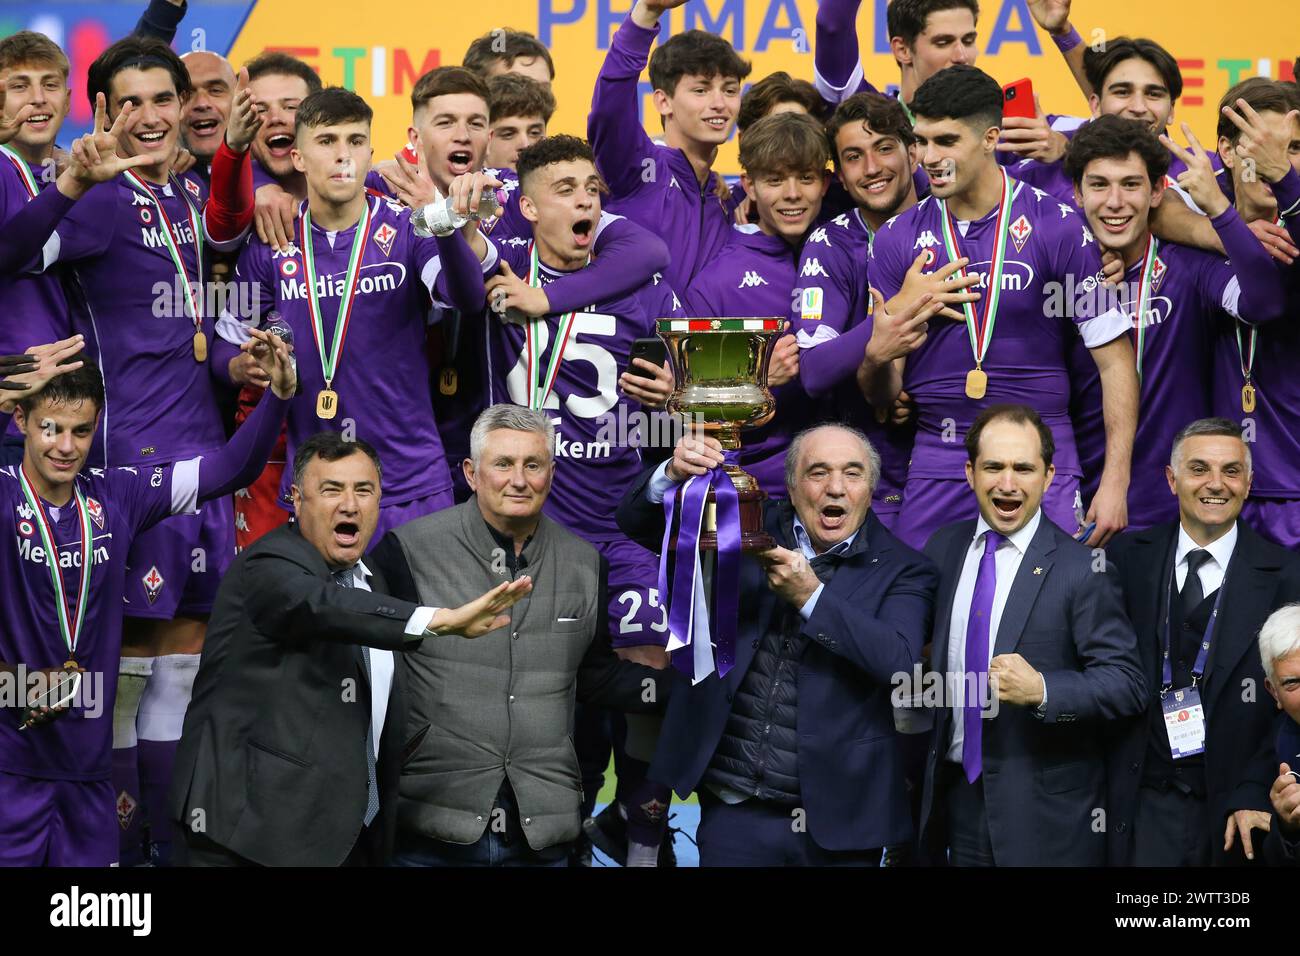 PHOTO REPERTORY - Parma, Italy, 28th April 2021. Joe Barone AC F Fiorentina Managing Director, Daniele Prade ACF Fiorentina Director of Sport, Rocco B Comisso Chairman of ACF Fiorentina and Joseph B Comisso celebrate with the players and the trophy following the 2-1 victory in the Primavera Italian Cup match at Stadio Ennio Tardini, Parma. Picture credit should read: Jonathan Moscrop/Sportimage via PA Images (Parma - 2021-04-28, Jonathan Moscrop/ipa-agency.net) ps the photo can be used respecting the context in which it was taken, and without intent defamatory of the decorum of the people Stock Photo